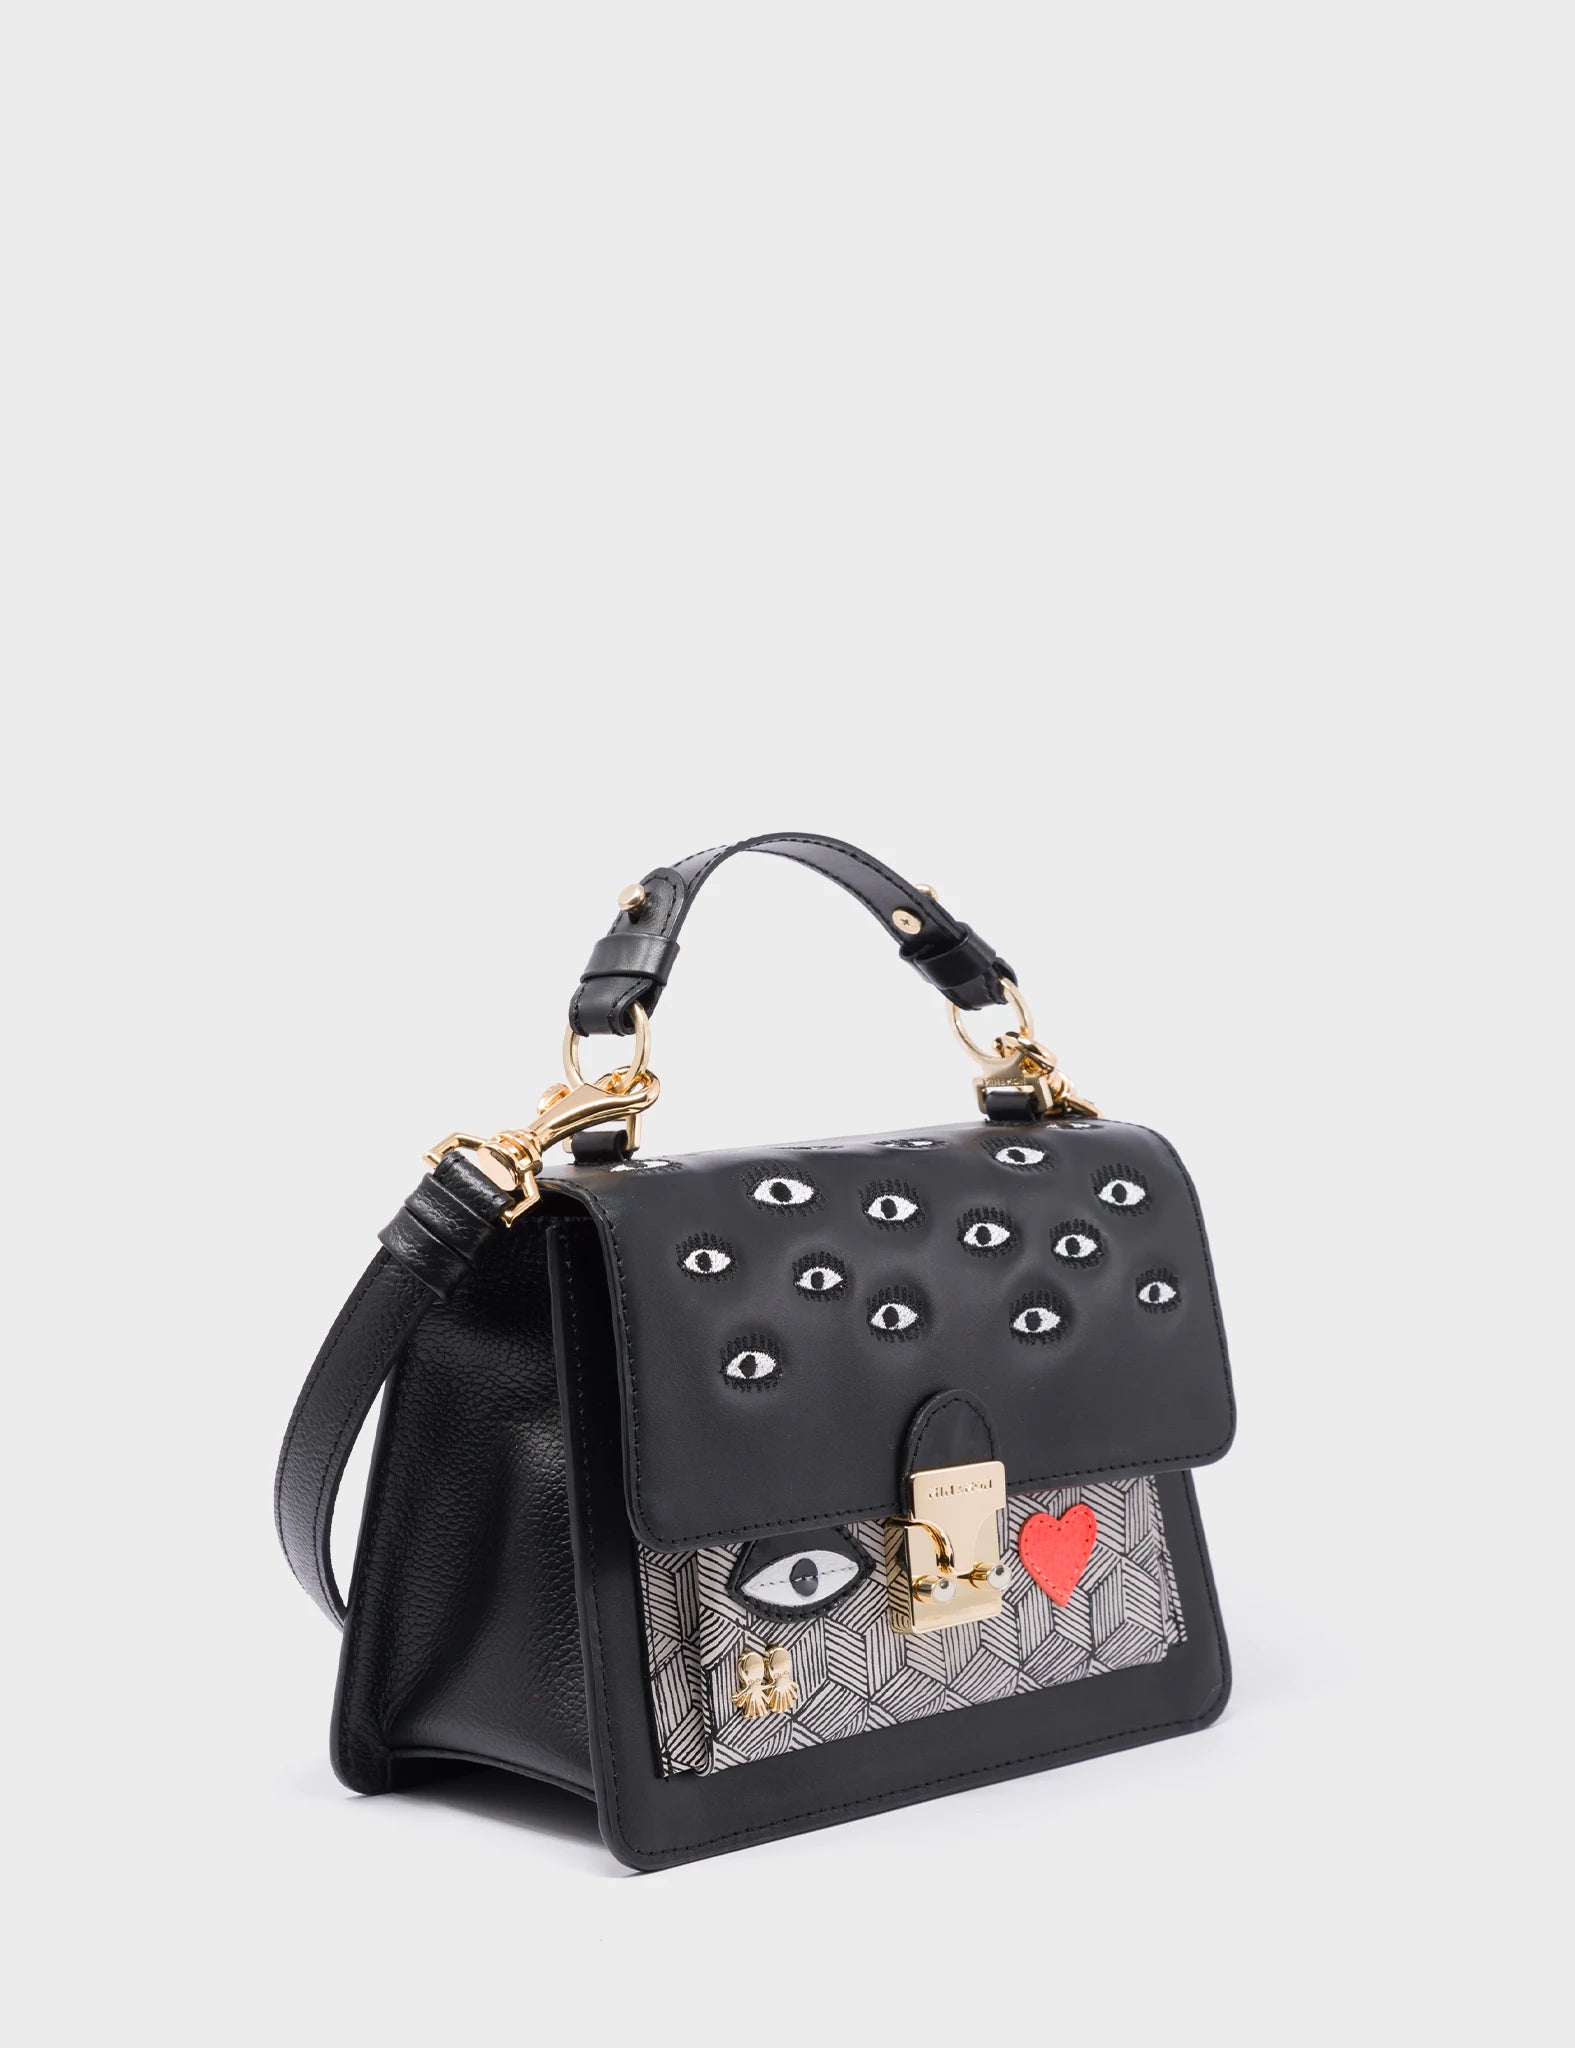 Silas Black Small Leather Crossbody Bag - Eyes Embroidery